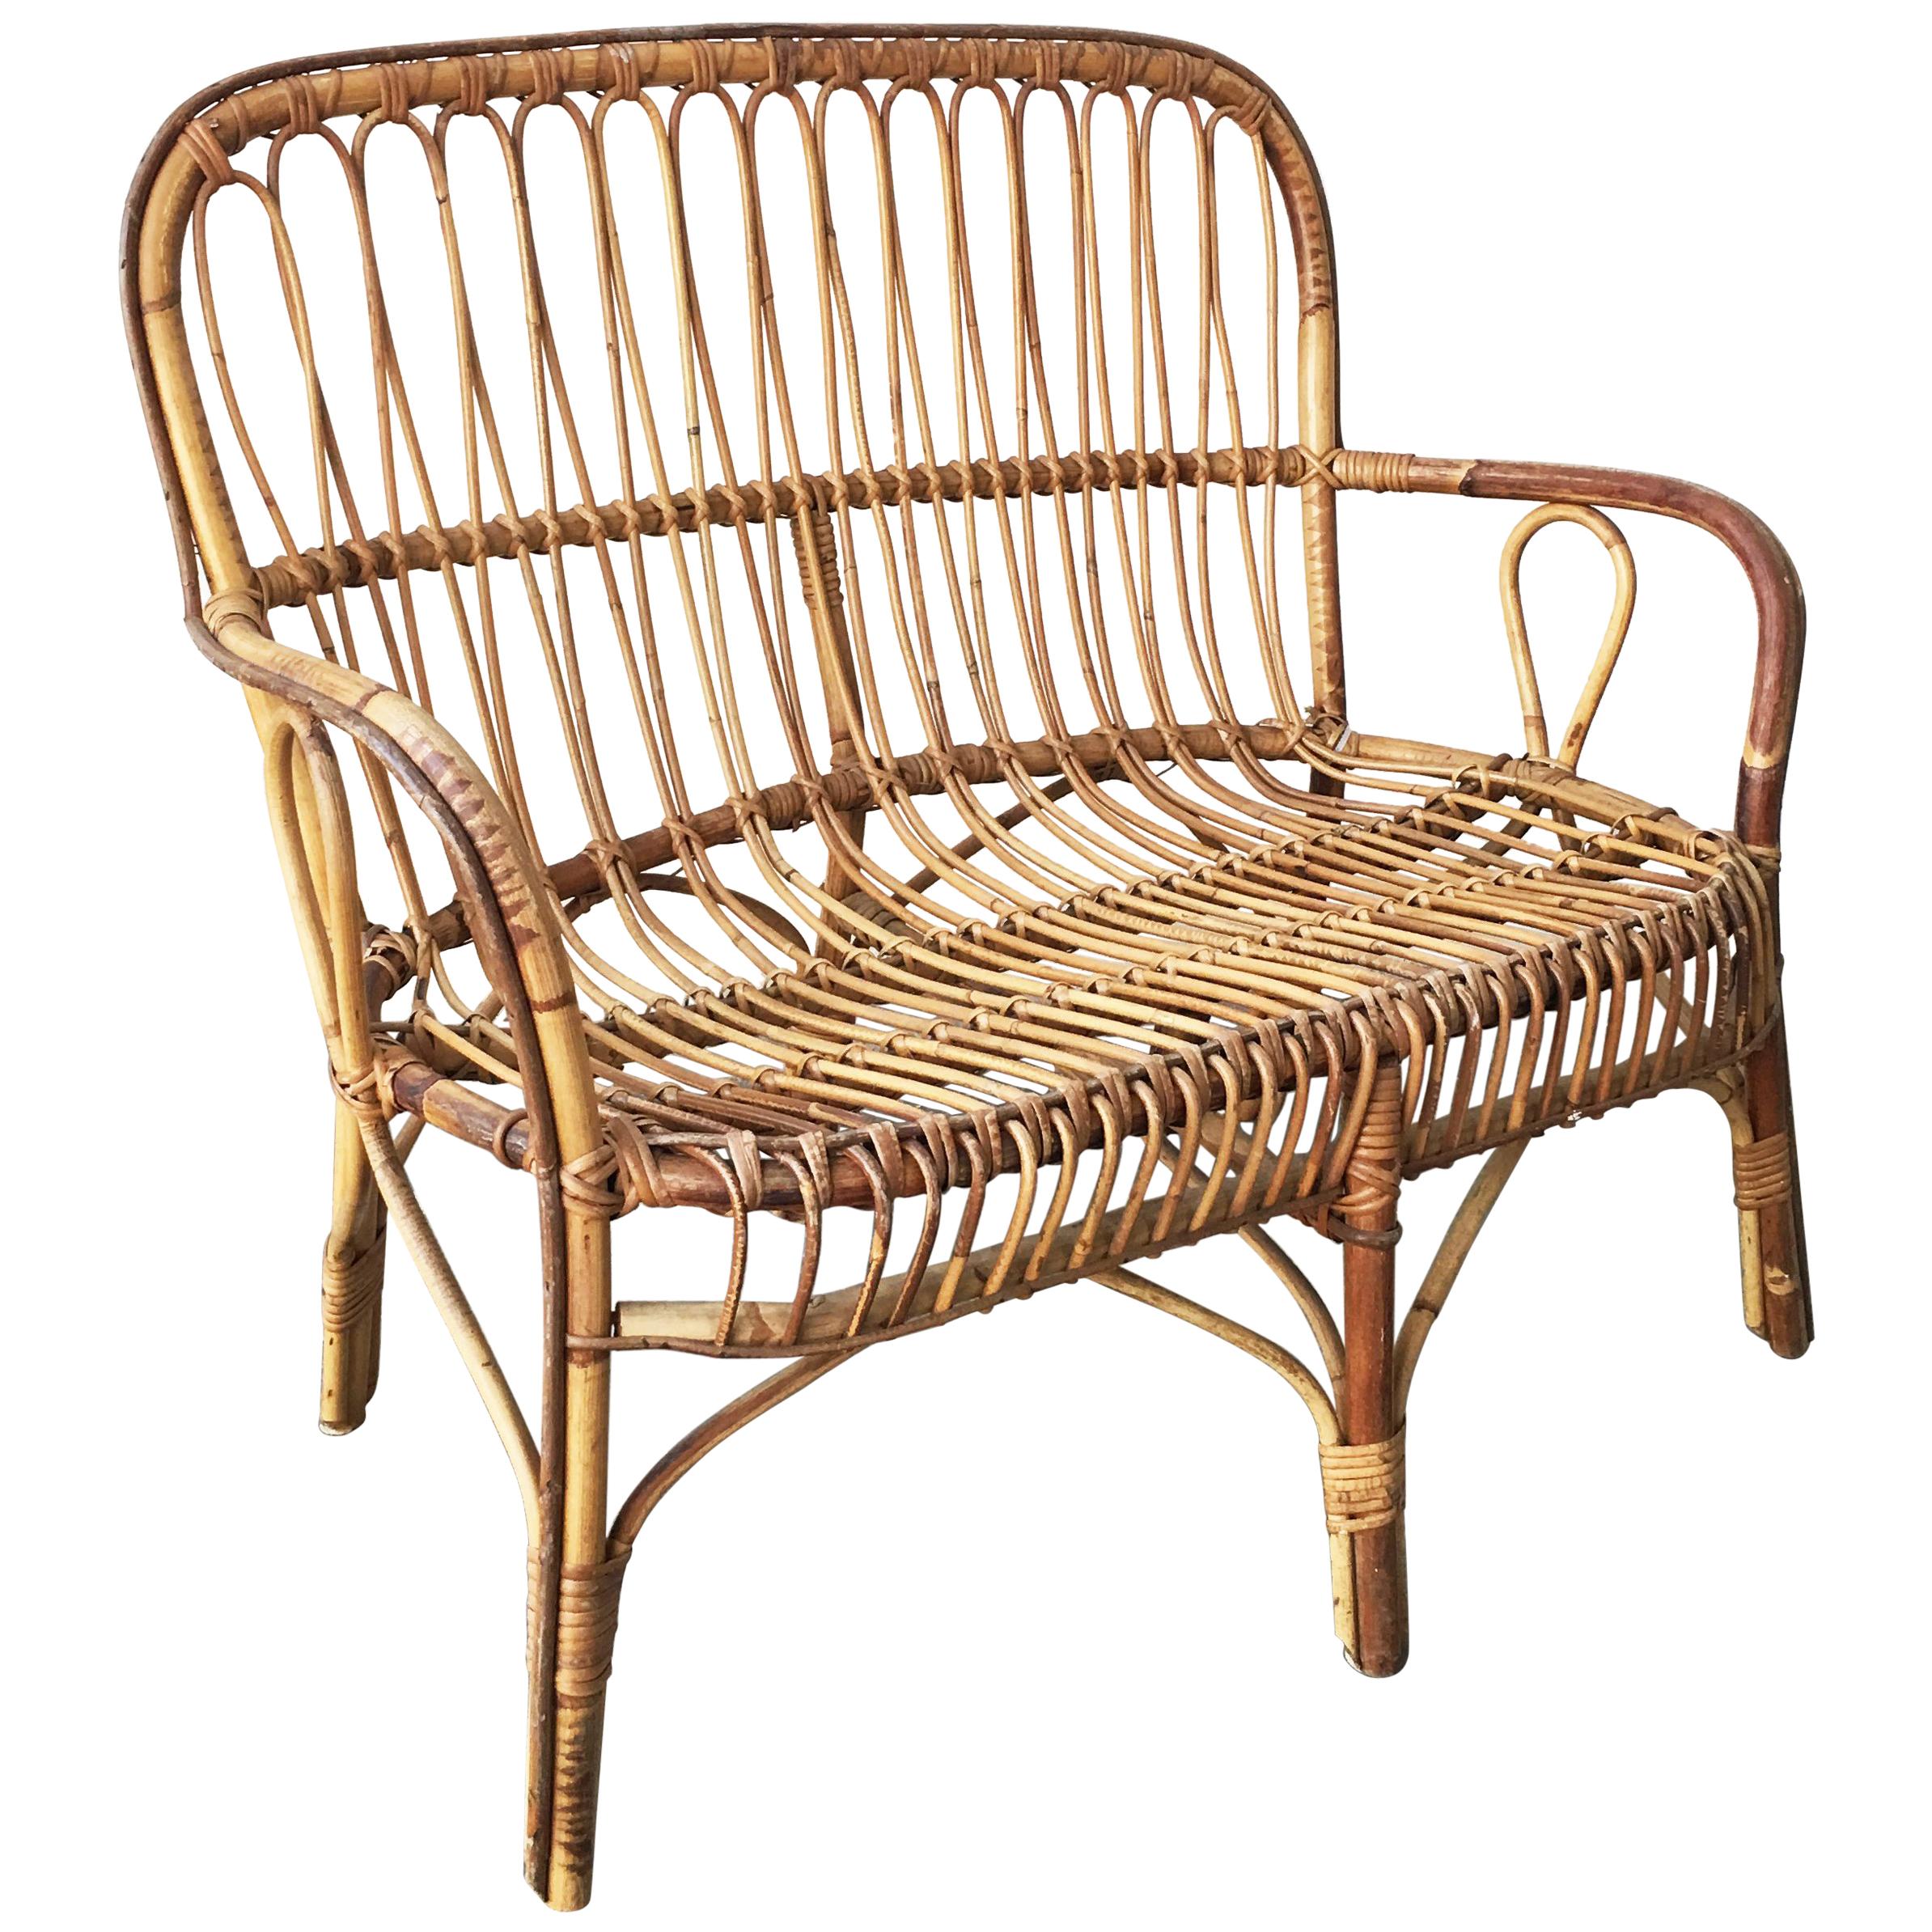 Italian Classic Sofa in Bamboo and Rattan with Curved Twine, Two-Seat, 1950s For Sale